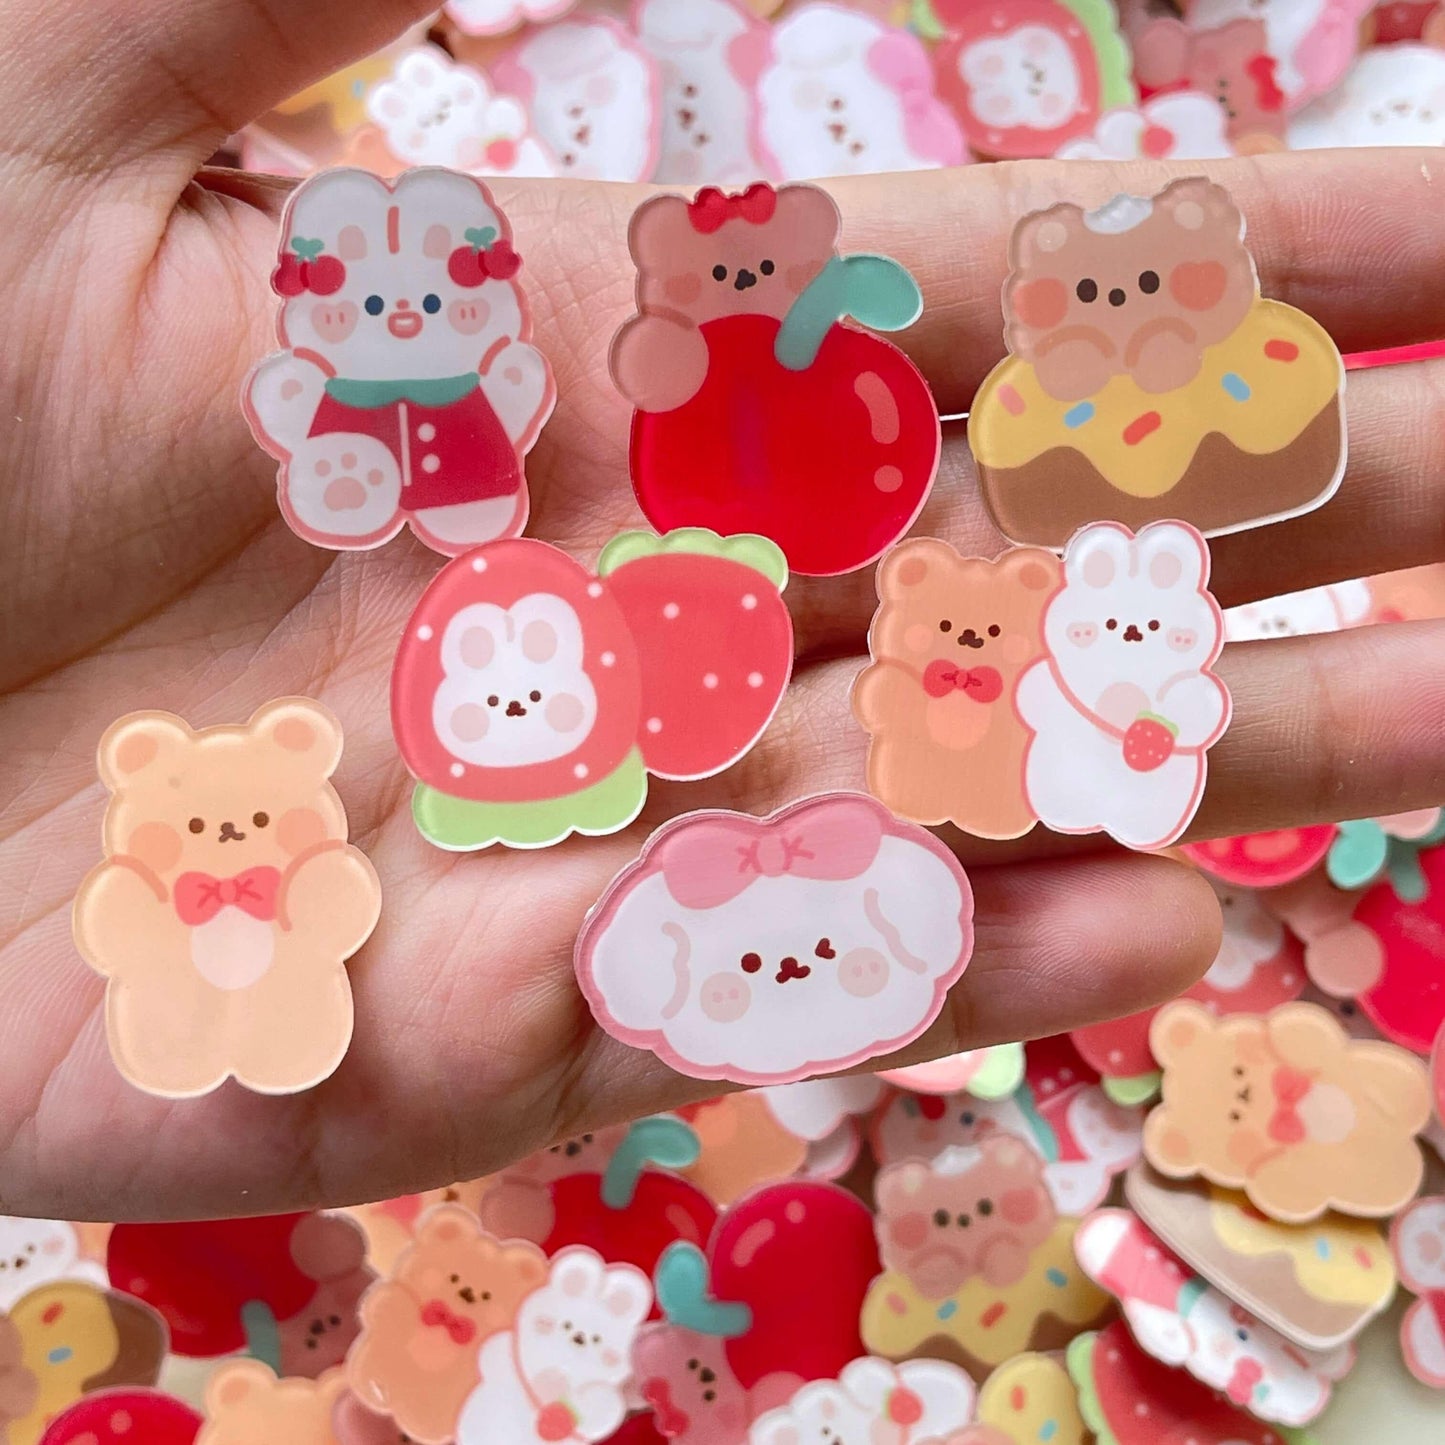 [SCOOPING TIME] 1 Scoop of Cute Kawaii Pins for T-Shirt, Jeans, Backpacks and etc.-NEW SPACE THEME ADDED & More NEW Kawaii Animals! - Belle Rose Nails